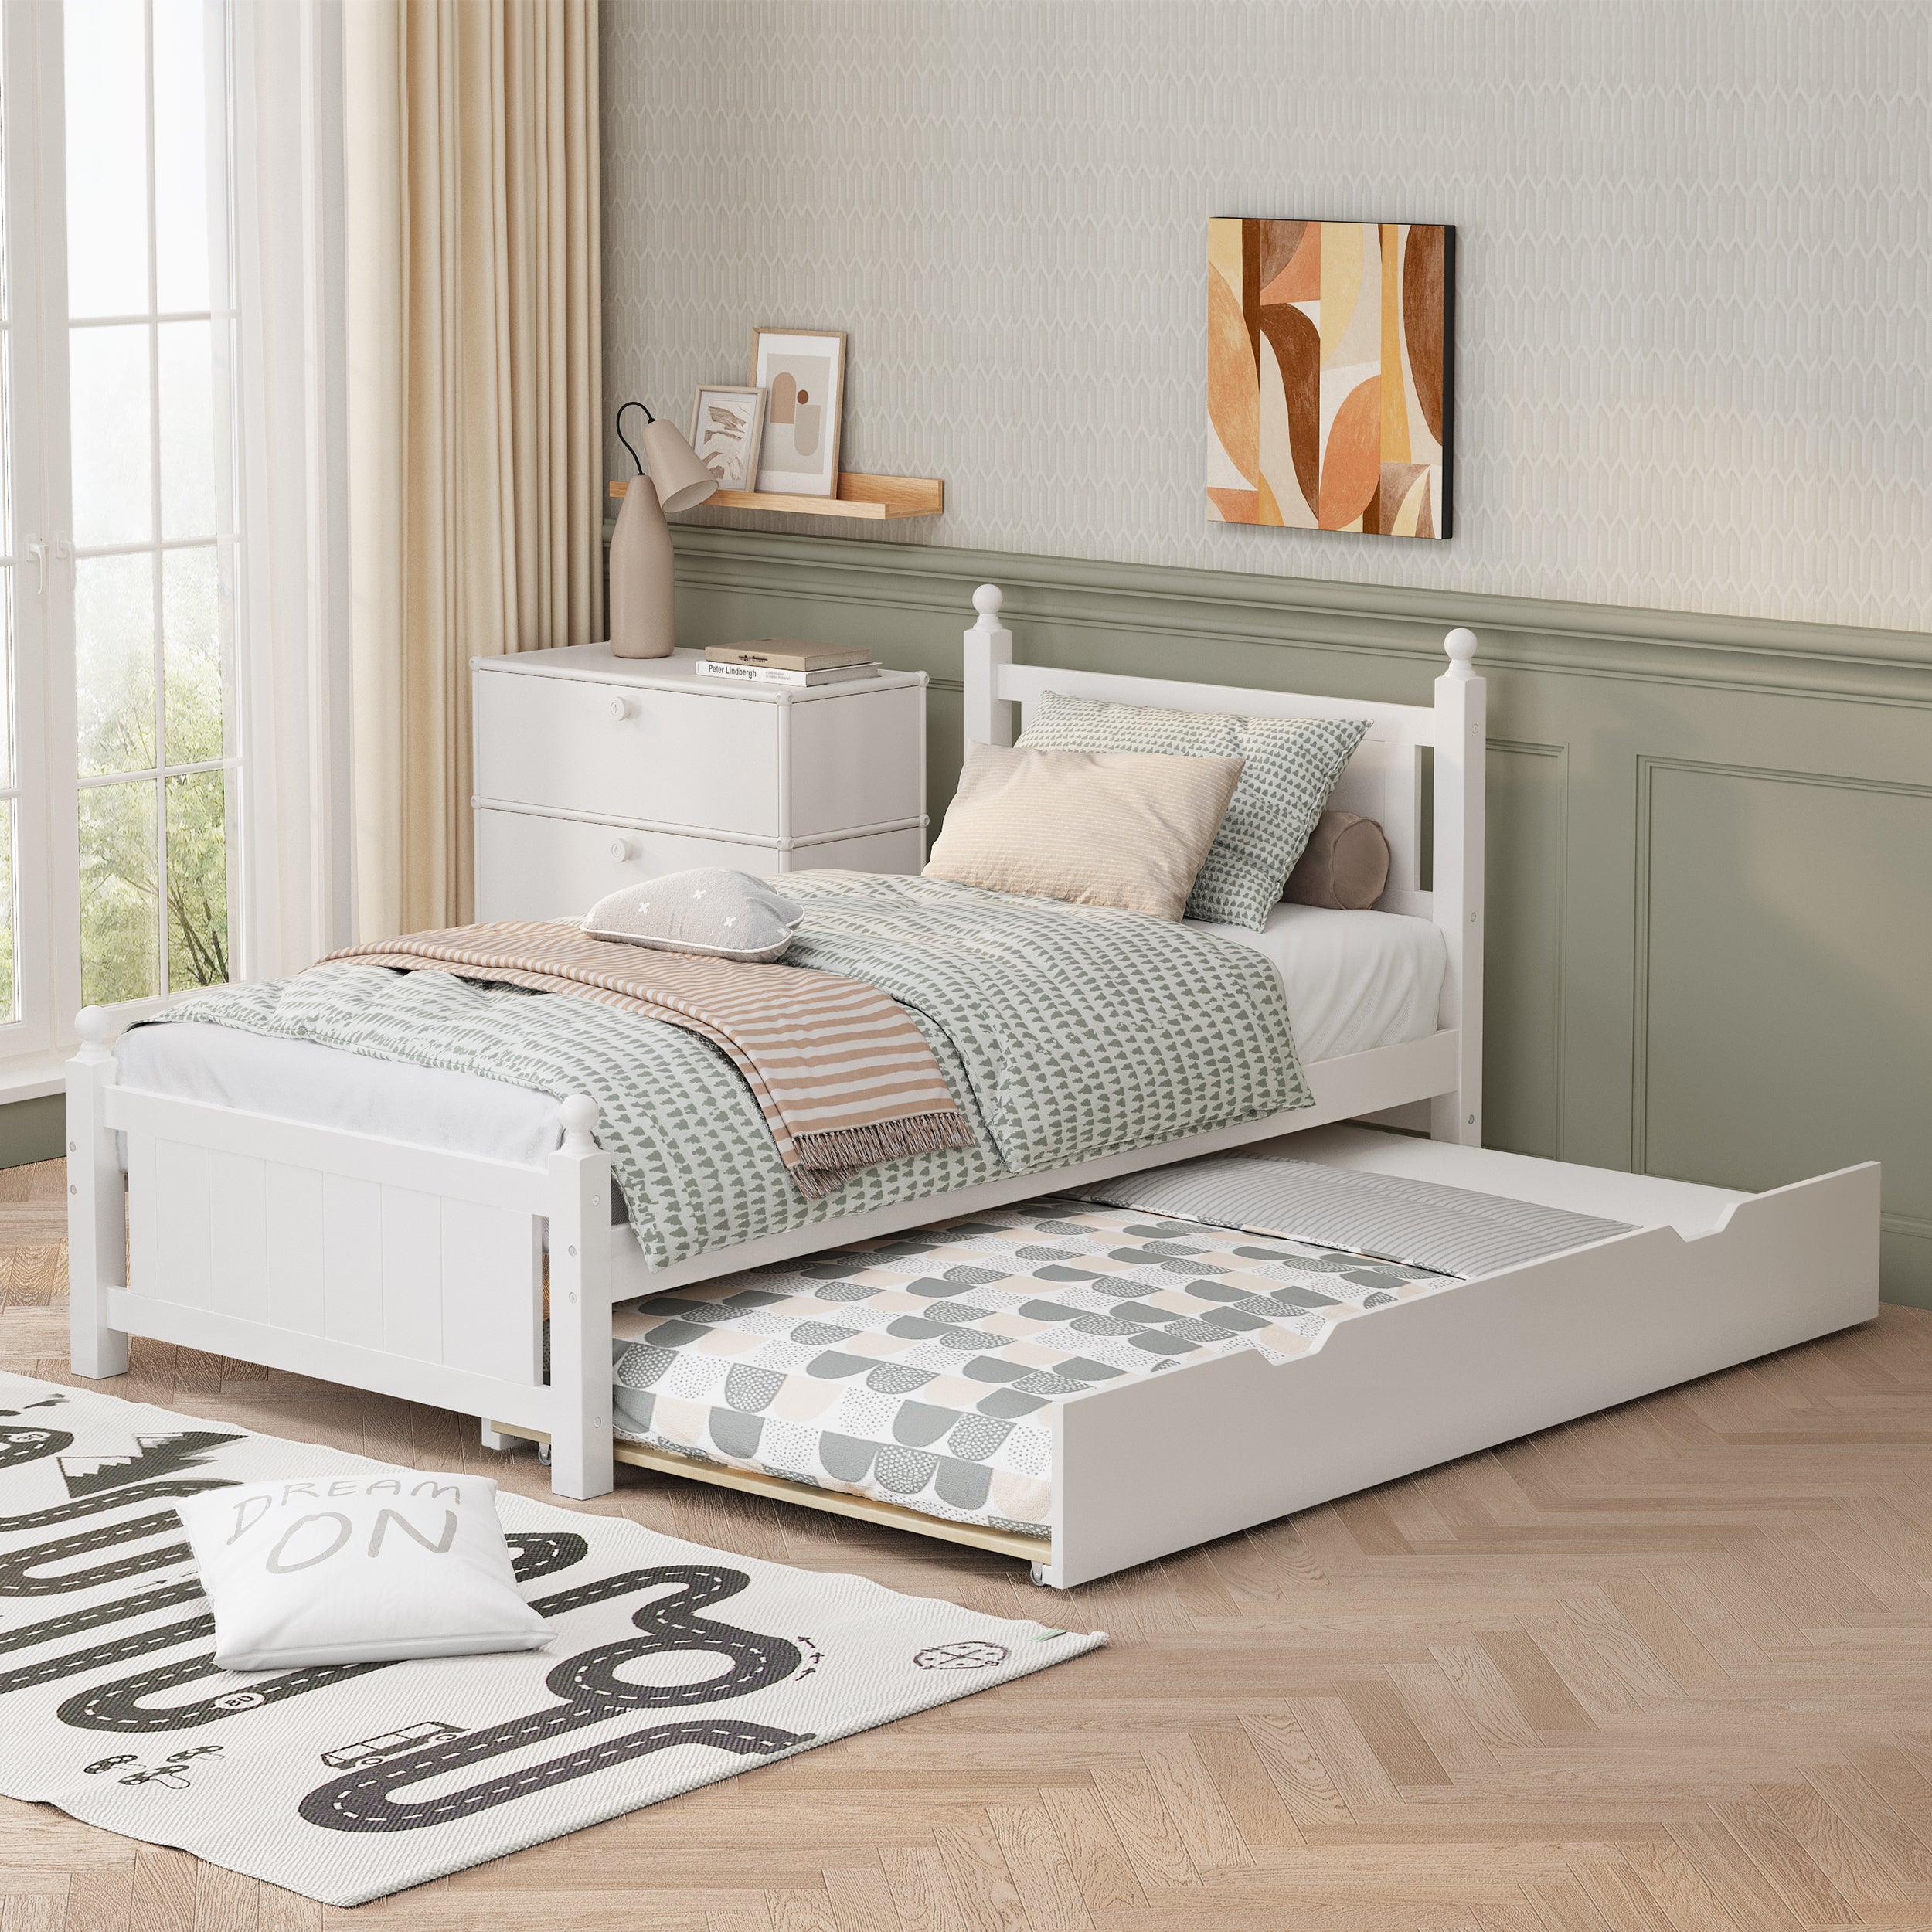 Twin-Size-Solid-Wood-Platform-Bed-Frame-with-trundle-,-White-Kids-Beds